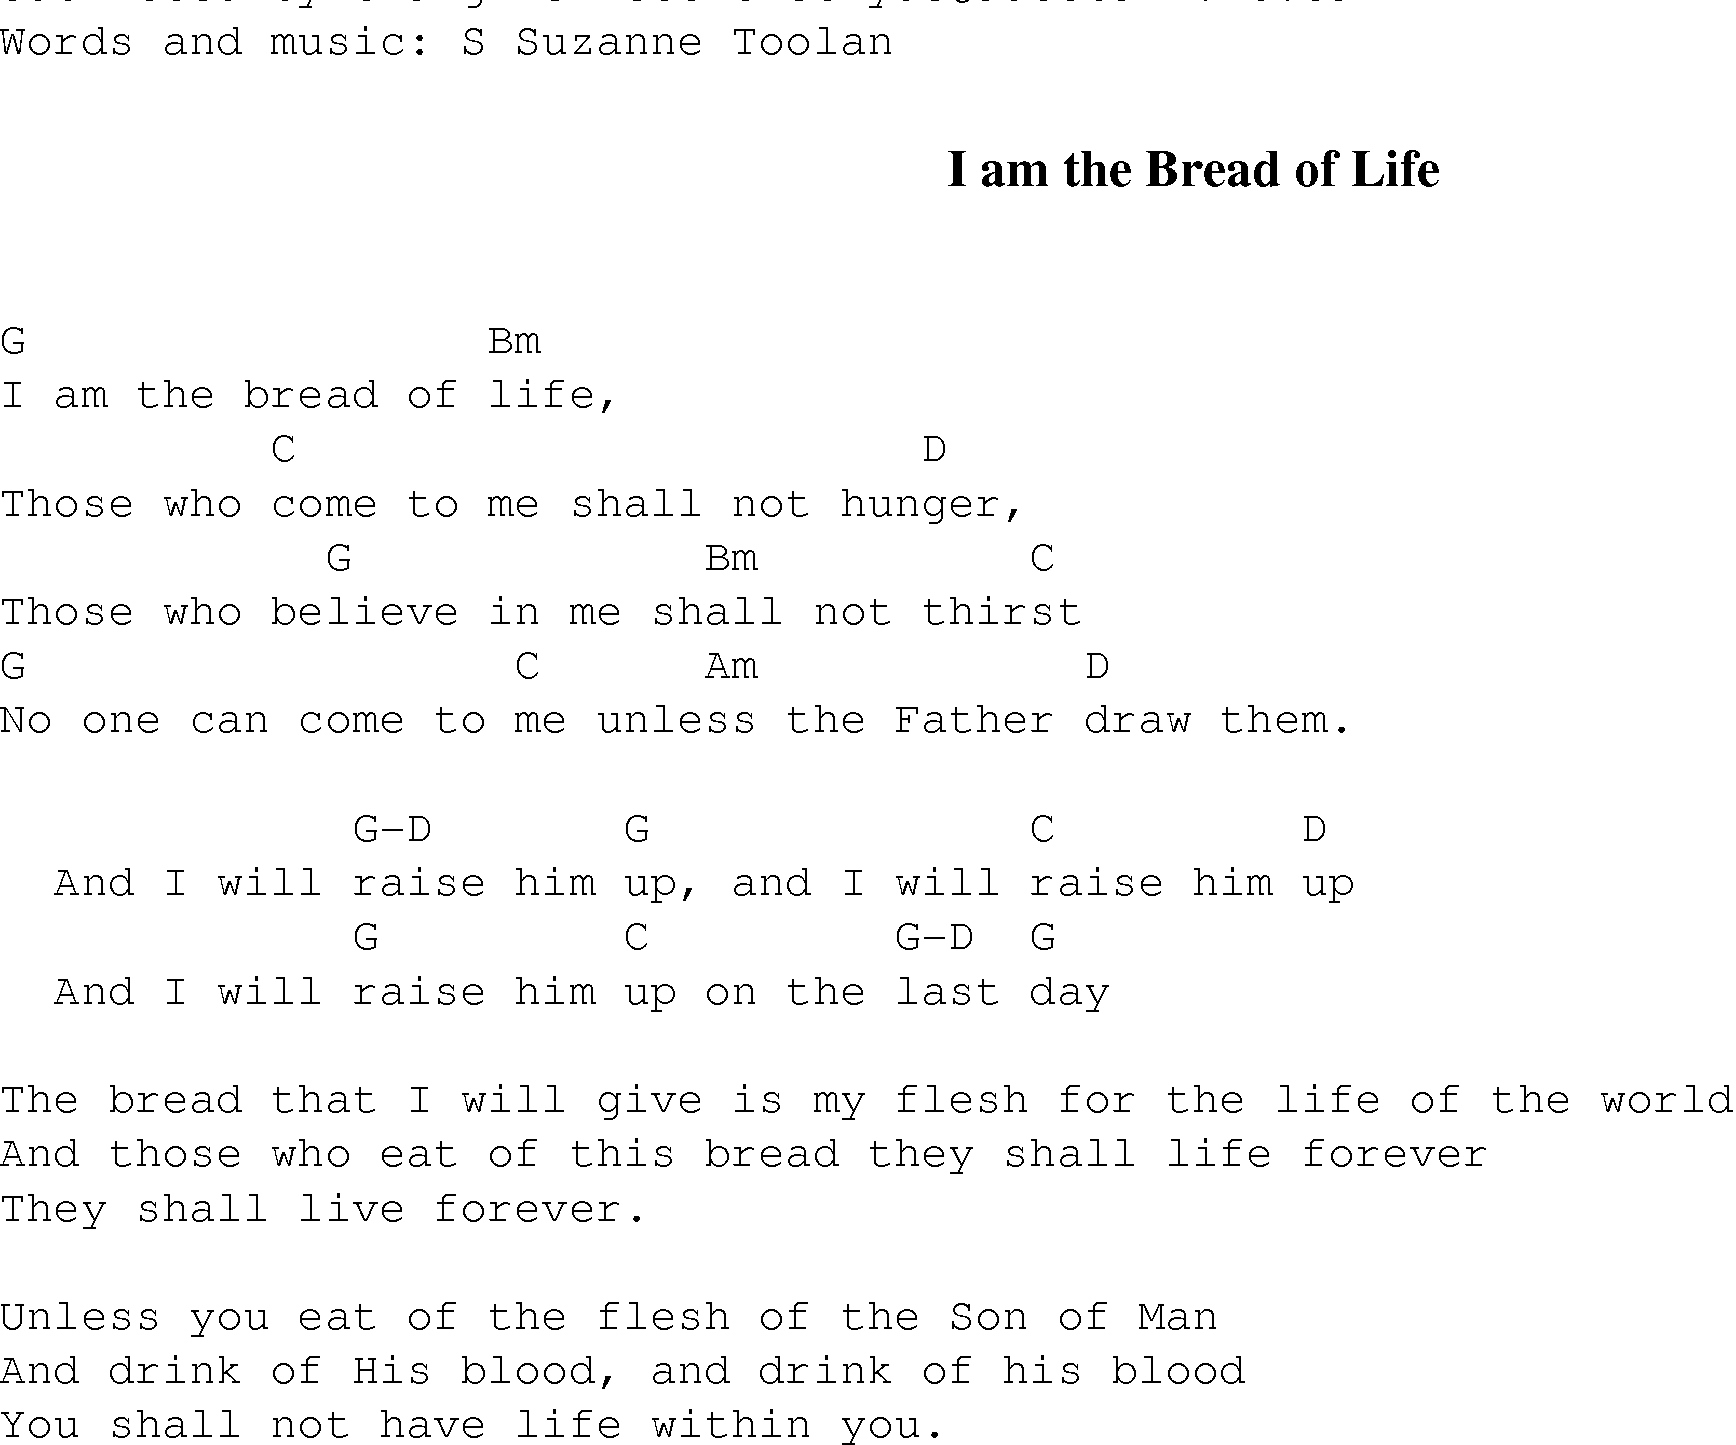 Gospel Song: I_am_the_bread_of_life, lyrics and chords.